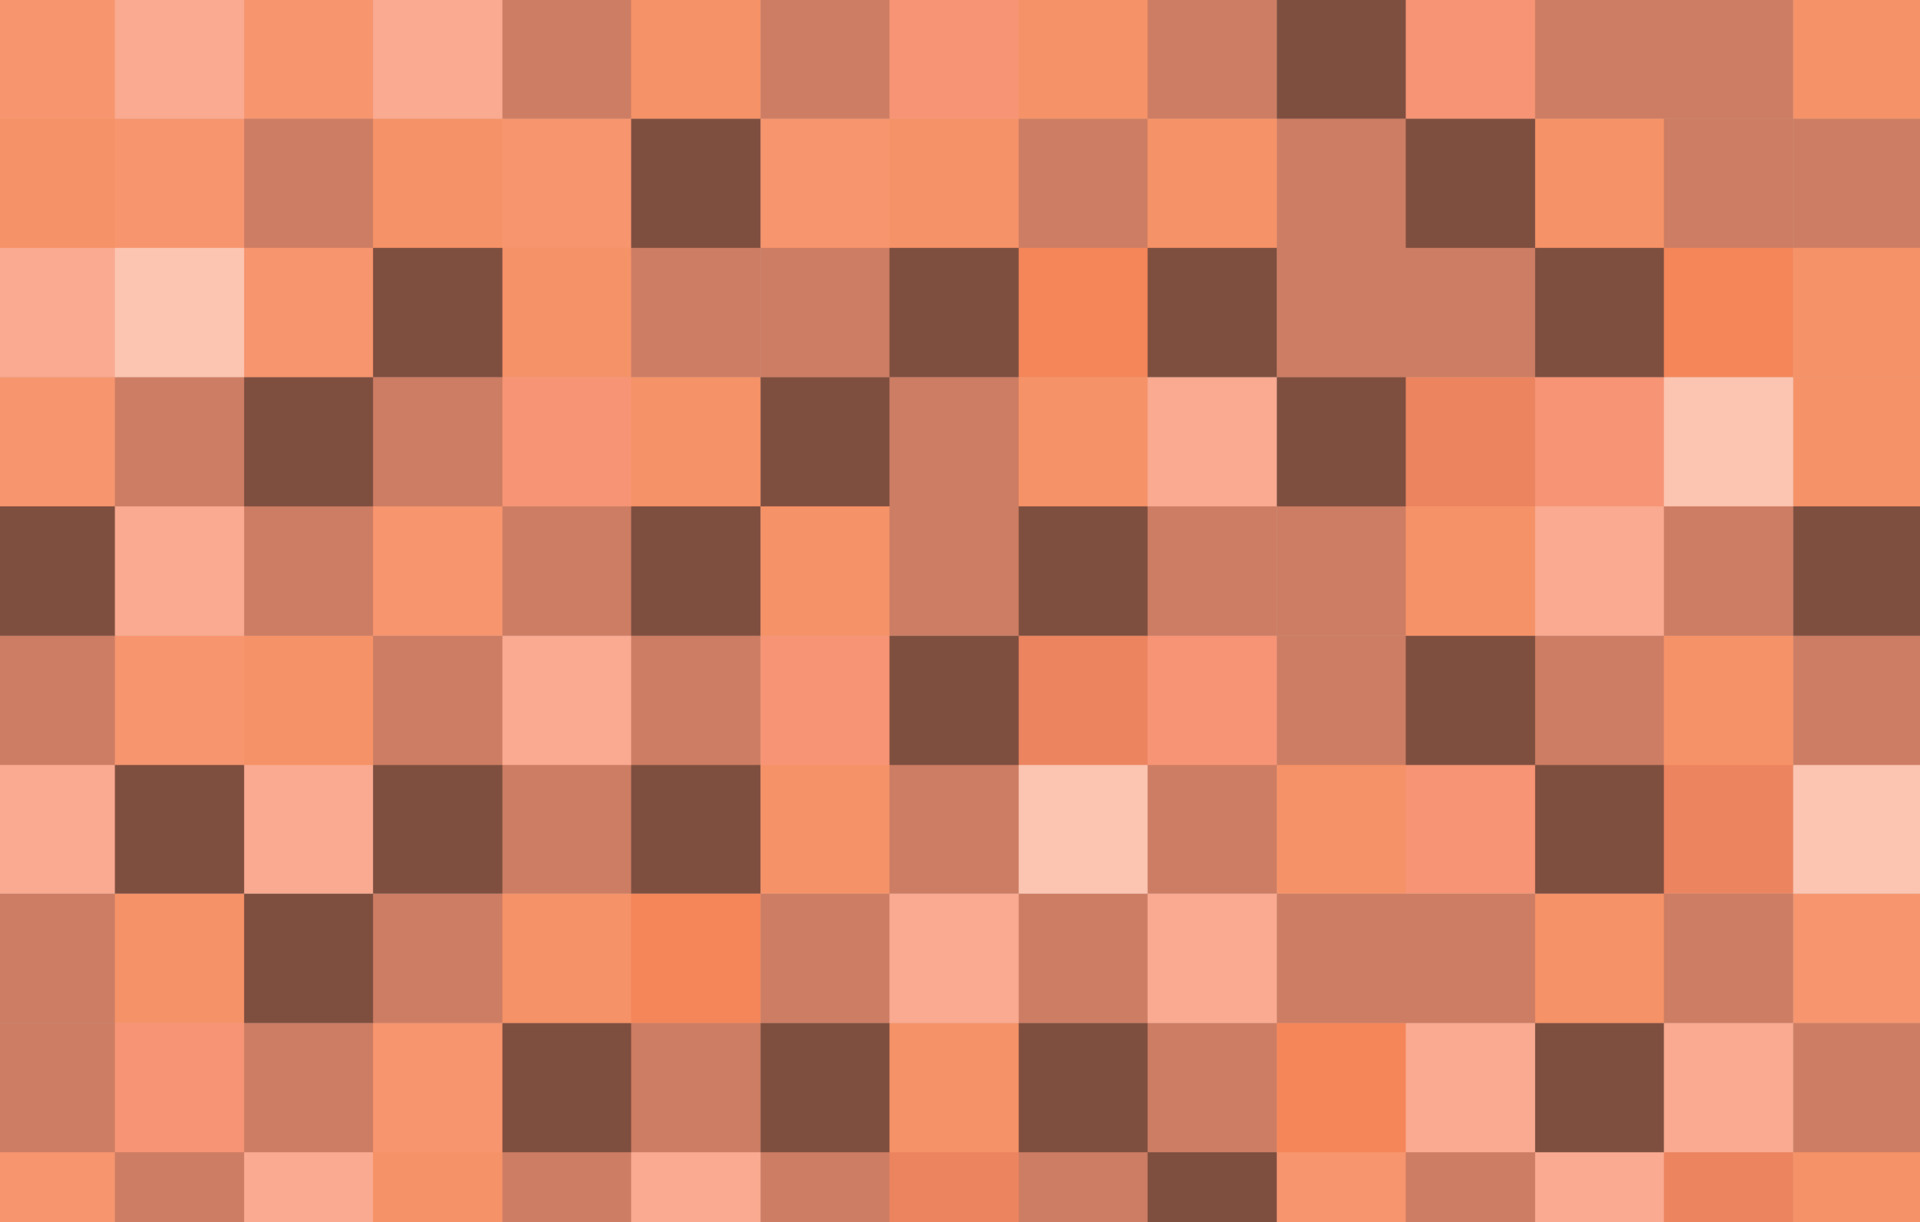 Censor Blur Effect Texture Isolated Blurry Pixel Color Censorship